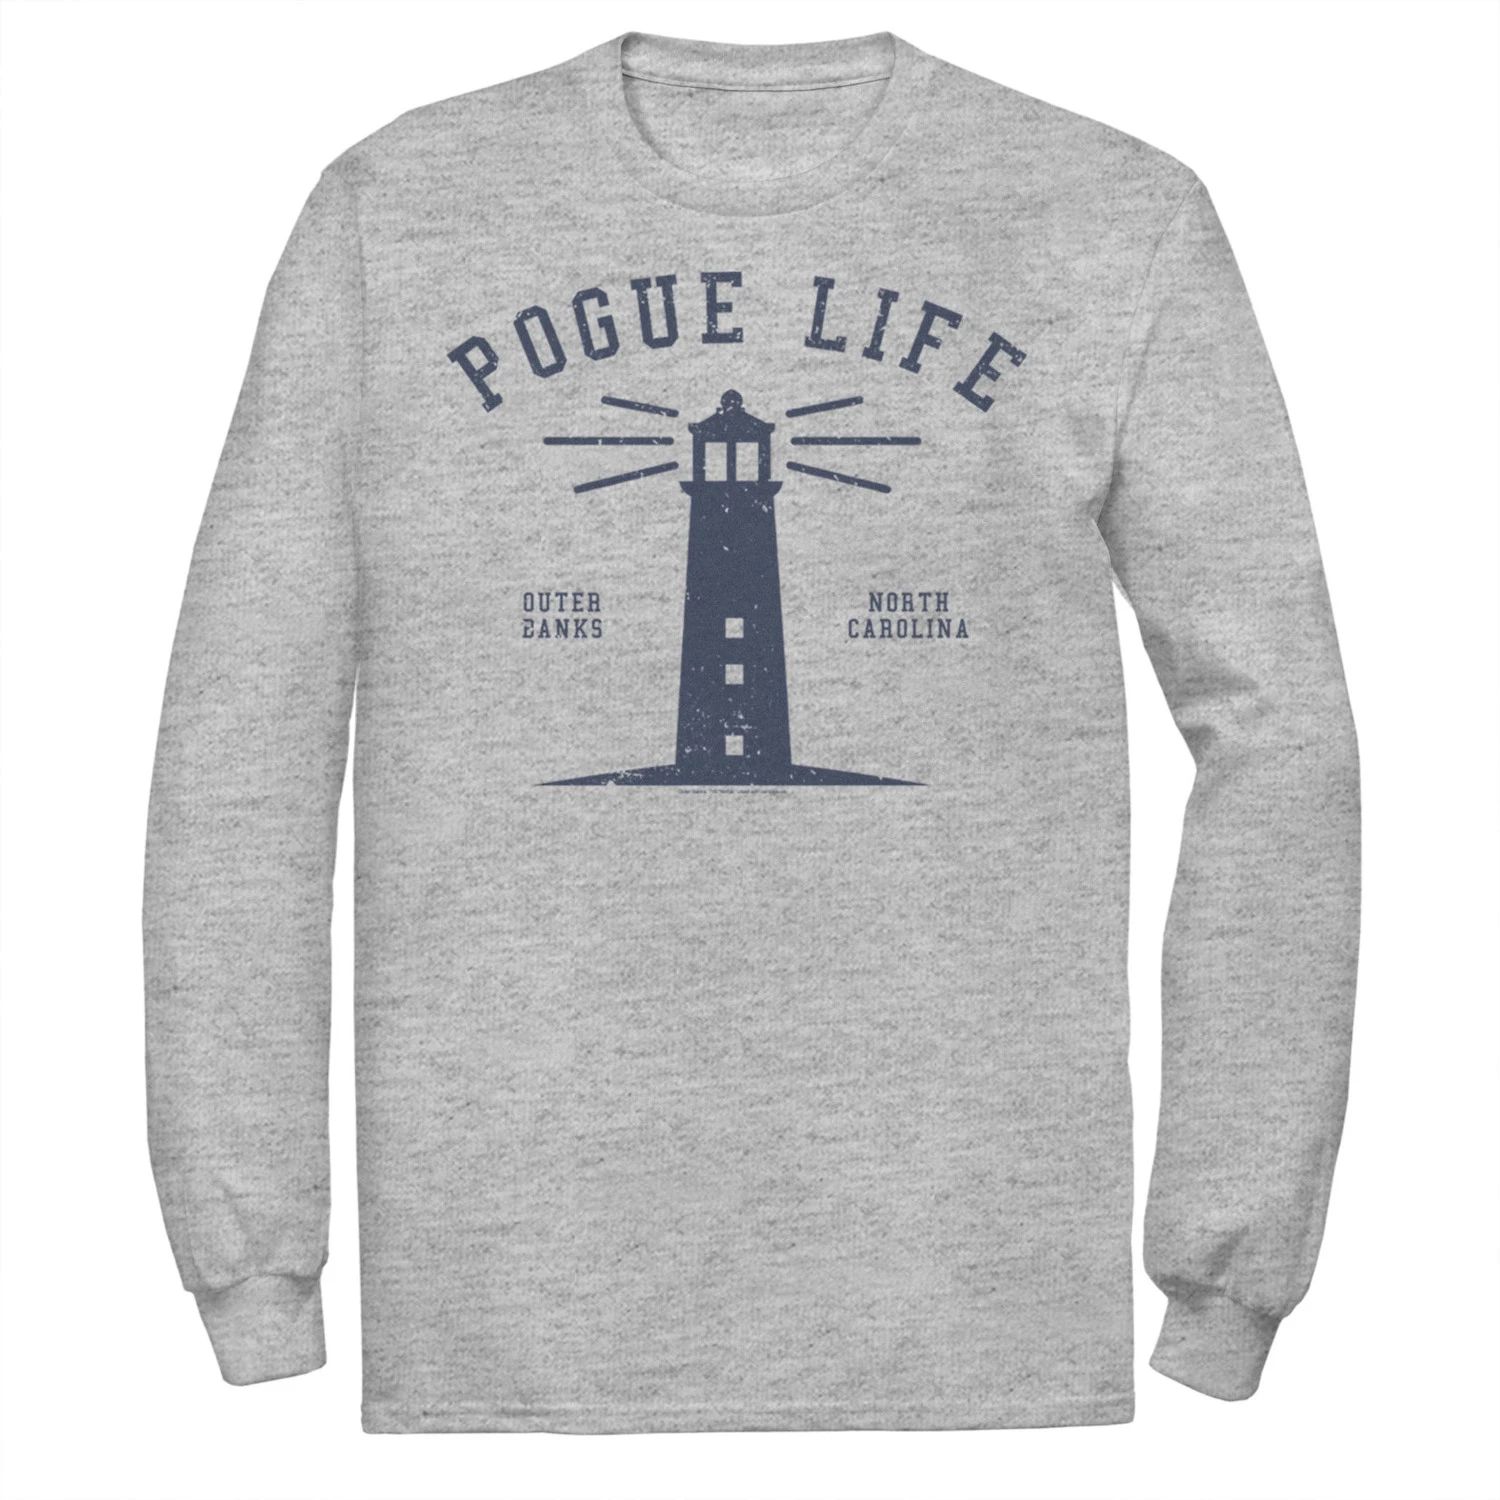 Мужская футболка Outer Banks Pogue Life Lighthouse Licensed Character